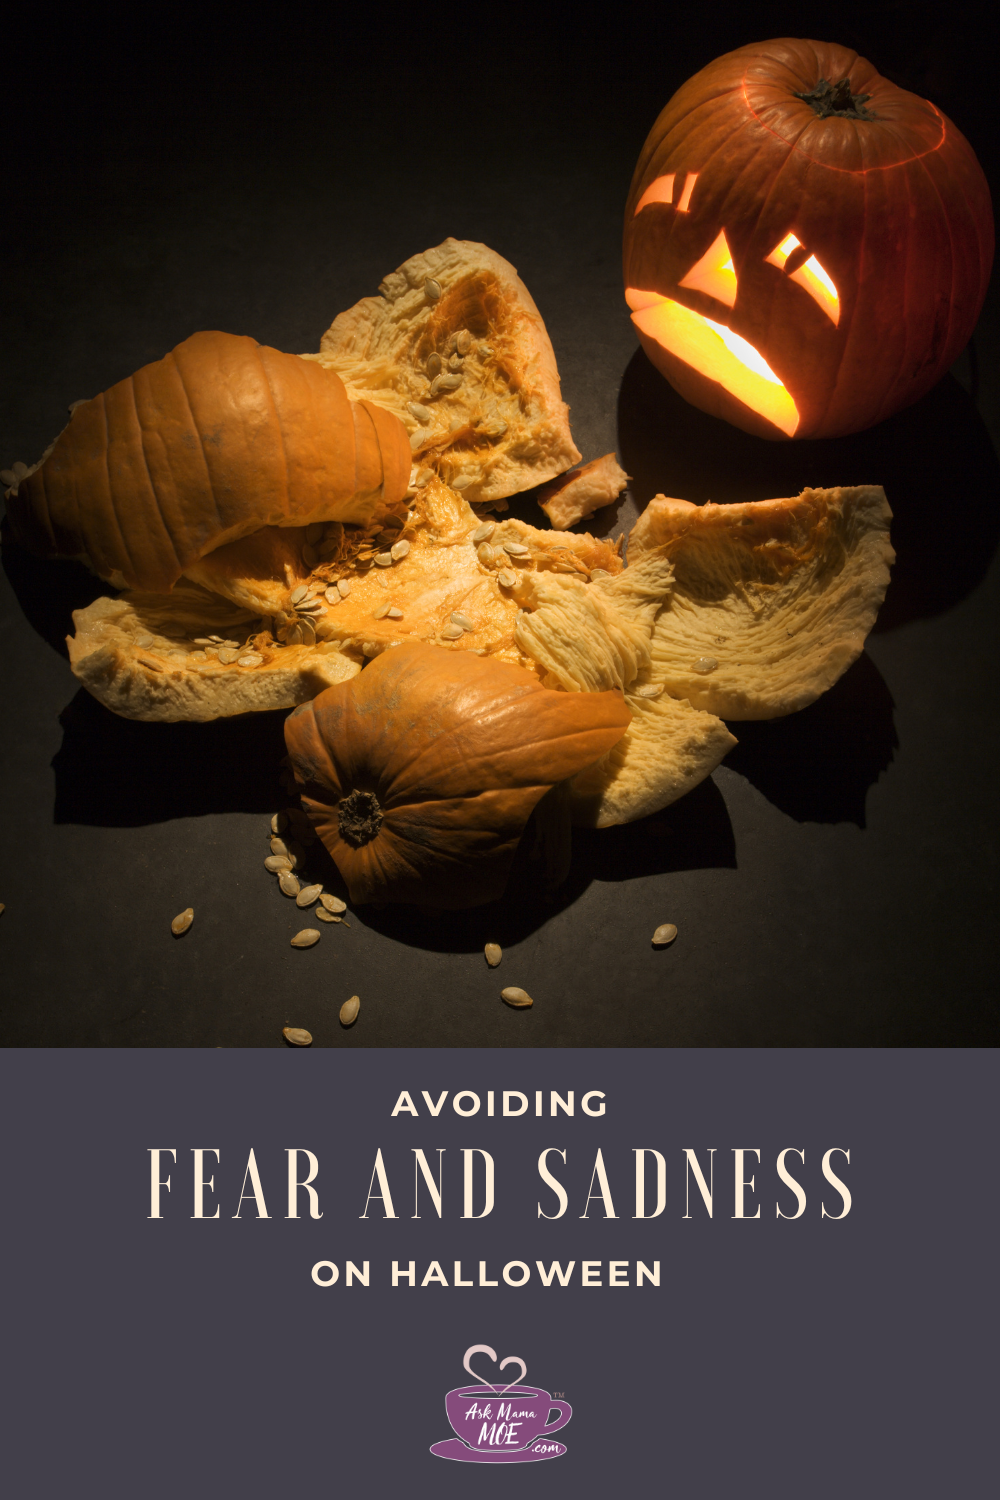 How to avoid fear and sadness on Halloween: this day of t he year can bring on a lot of emotions for all sorts of people. Here are a few of my tips to keep it light-hearted and fun